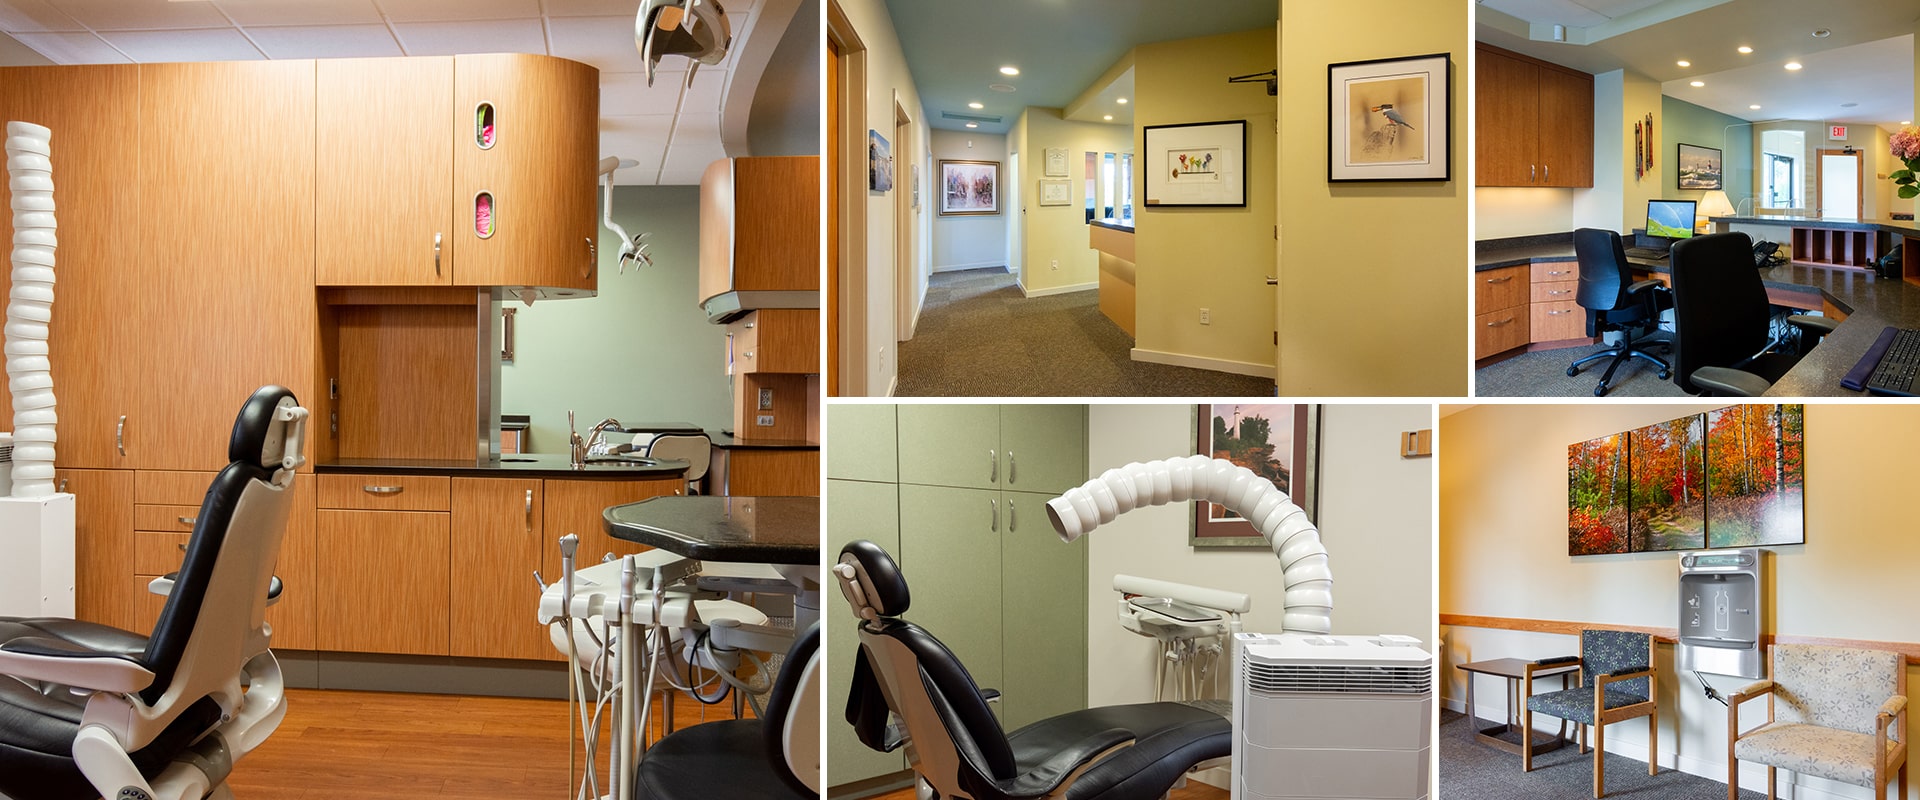 Collage of the dental office